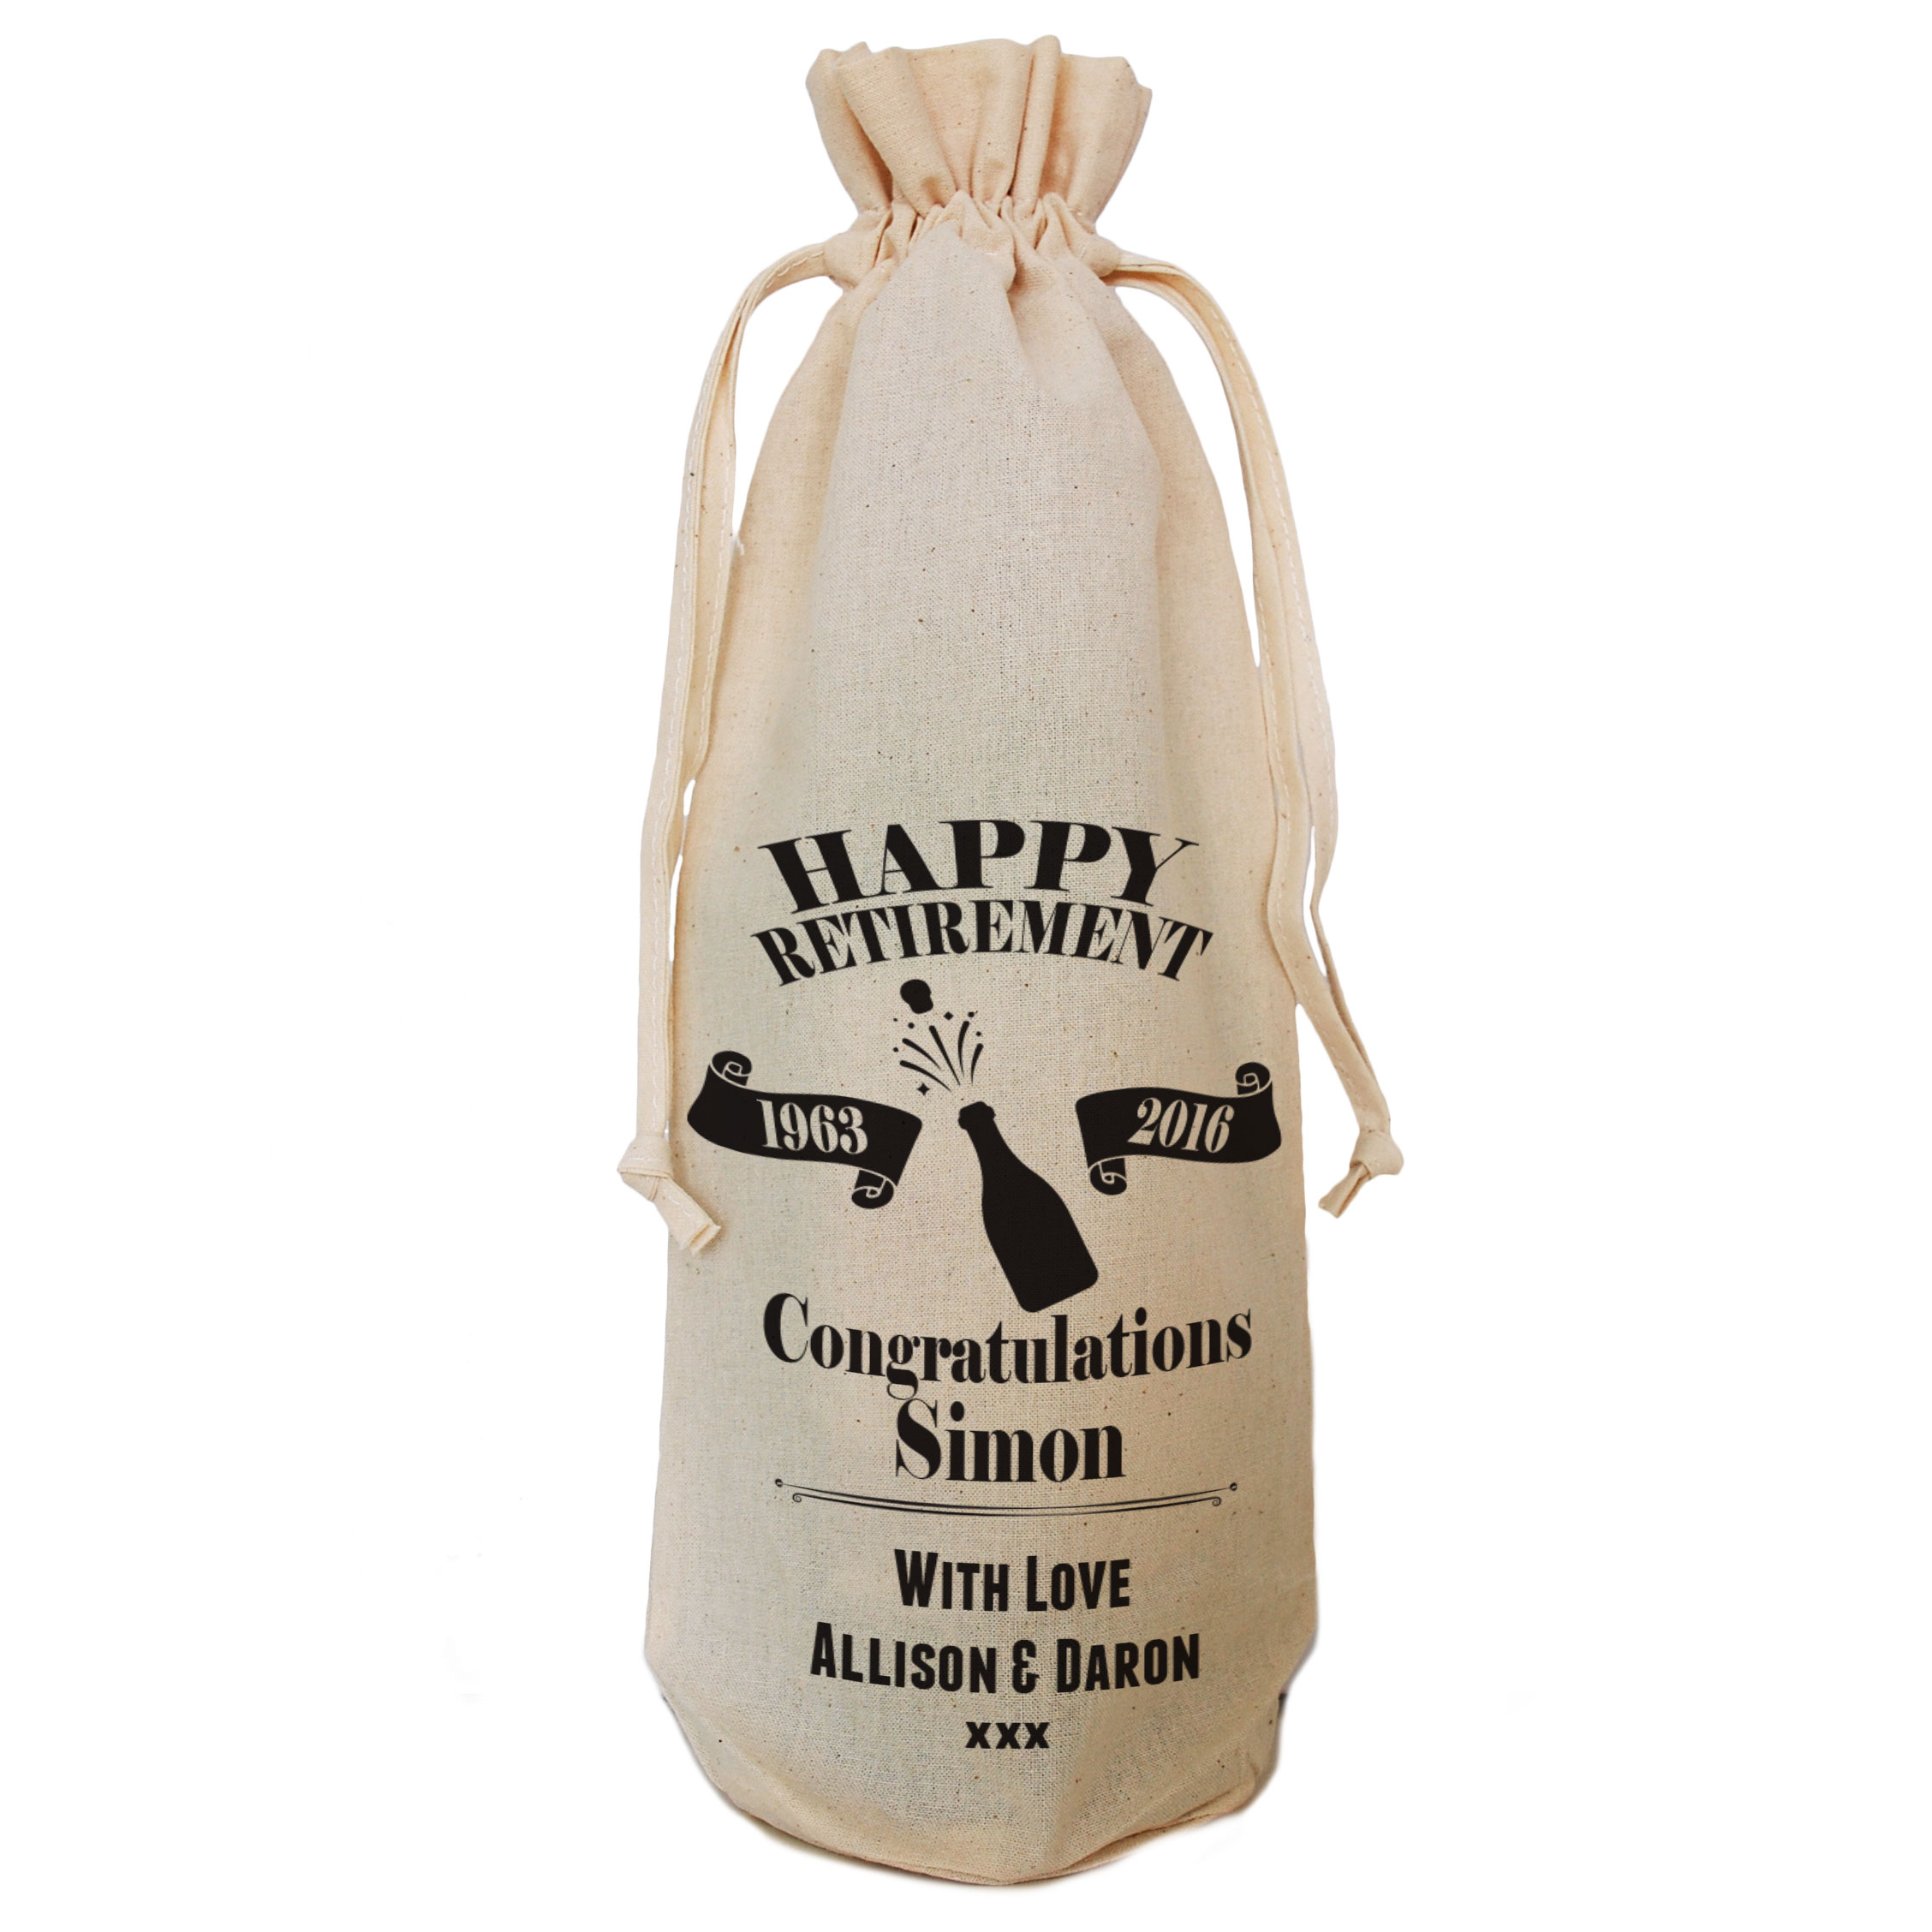 PERSONALISED COTTON BOTTLE GIFT BAGS